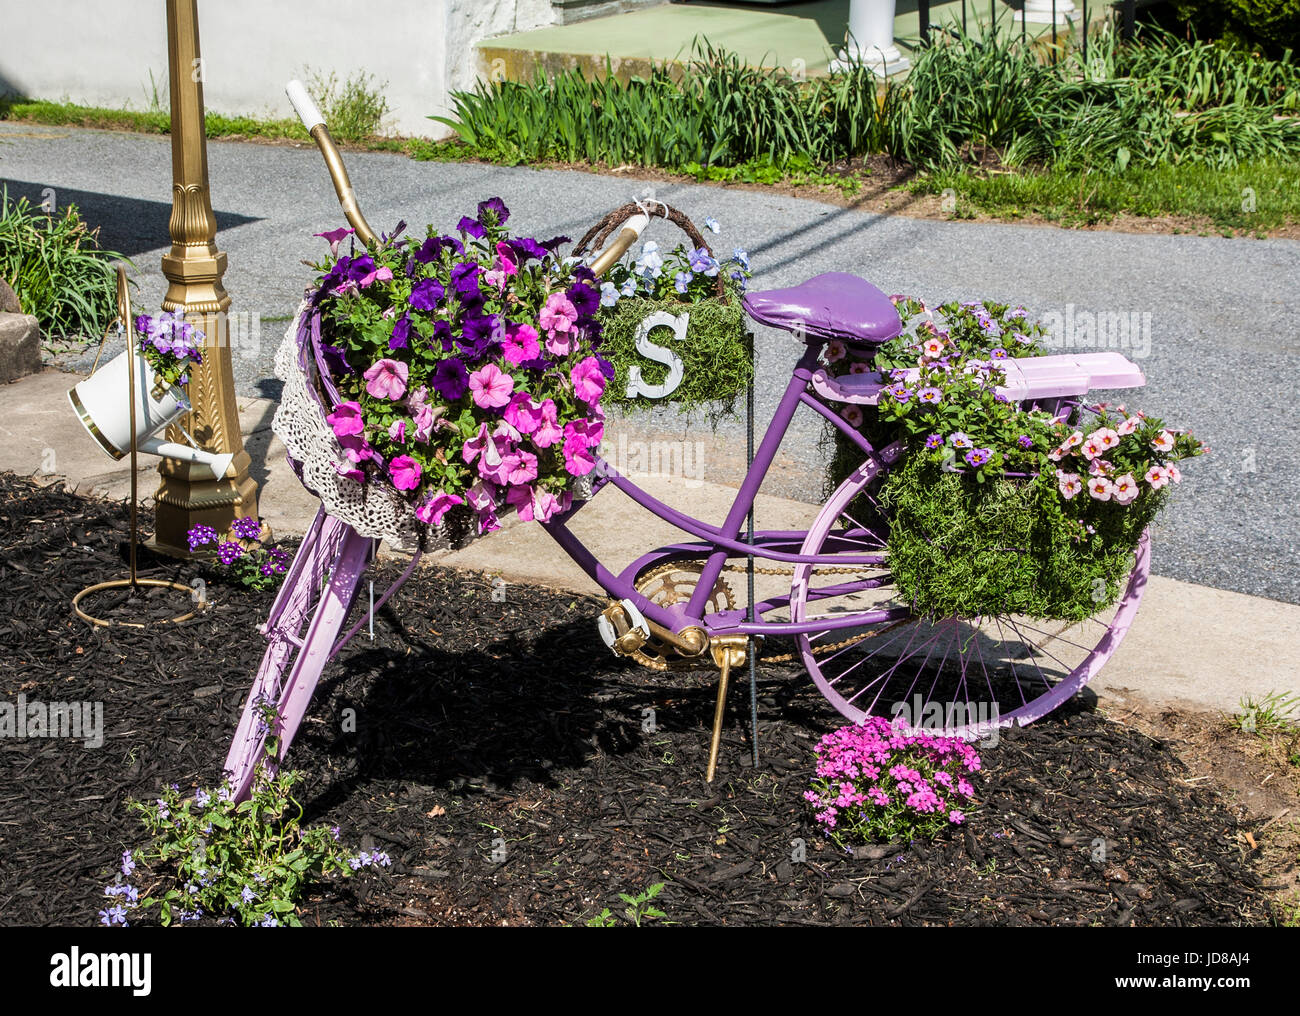 Vintage style garden bicycle painted lavender and decorated with potted flowers, Lancaster County, Pennsylvania, USA, US, flowers in bike, flower pots Stock Photo